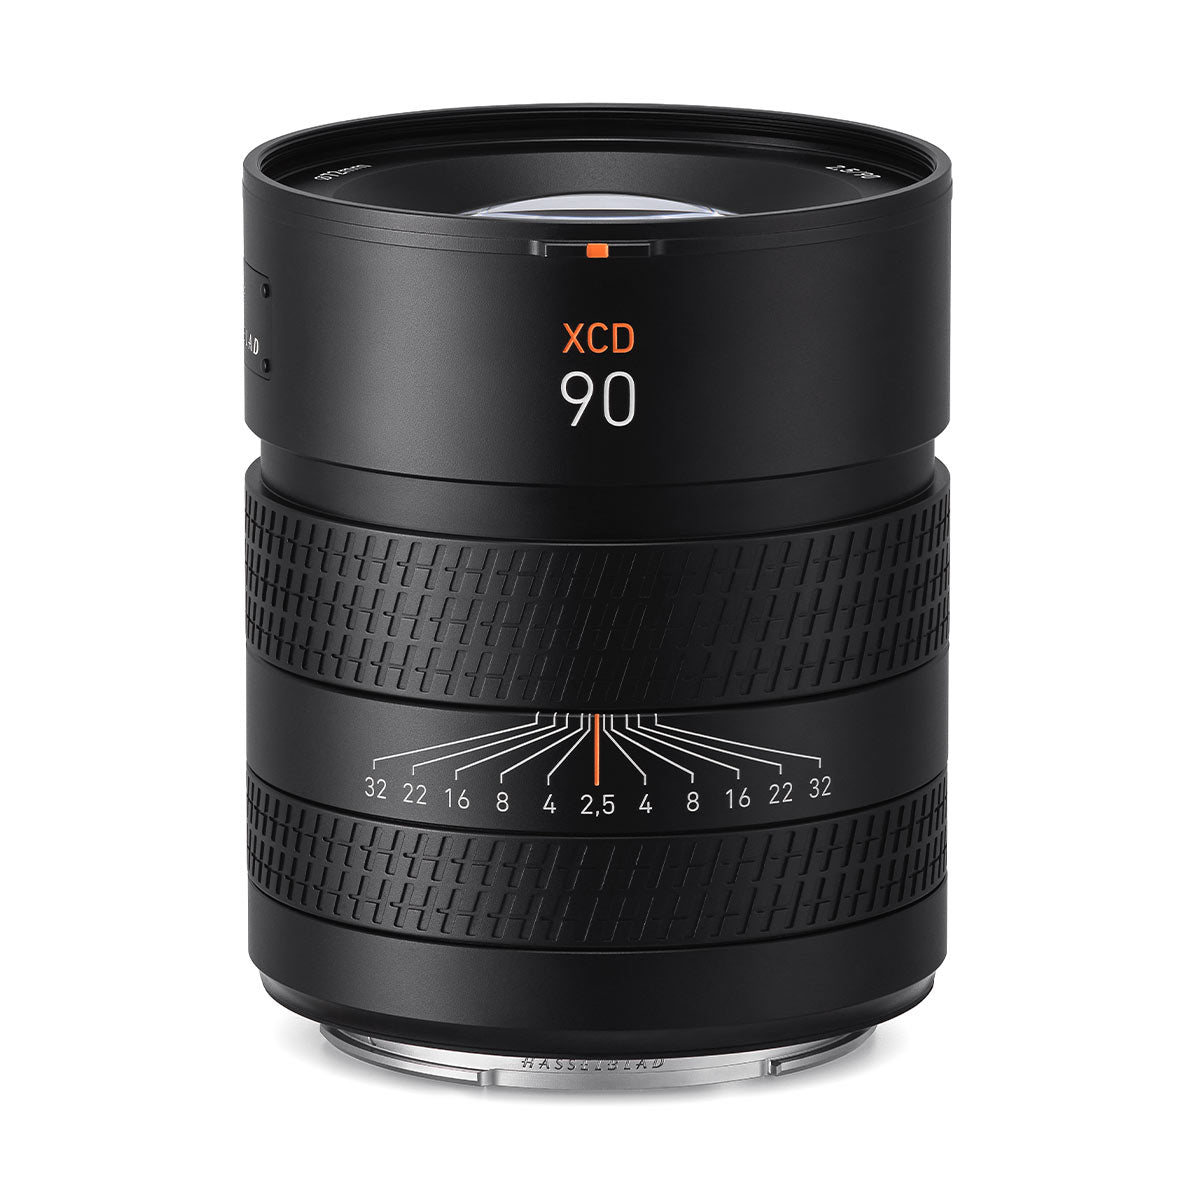 Hasselblad XCD 90mm f2.5 Lens